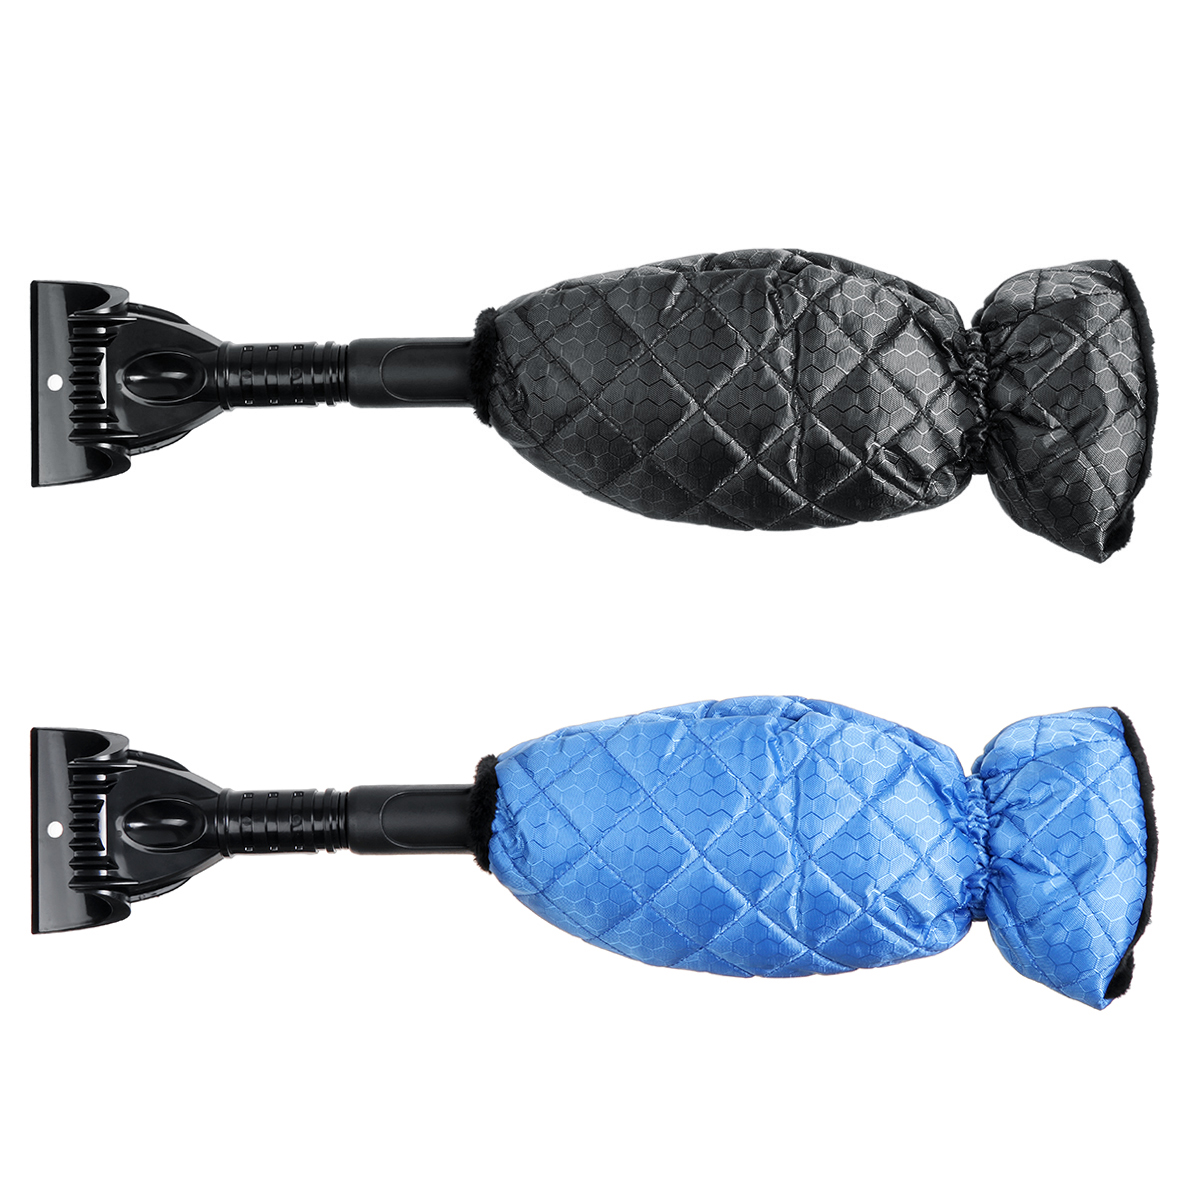 56CM-Telescopic-Rotating-Snow-Shovel-With-Gloves-Vehicle-Winter-Shoveling-Snow-Tools-1786471-9